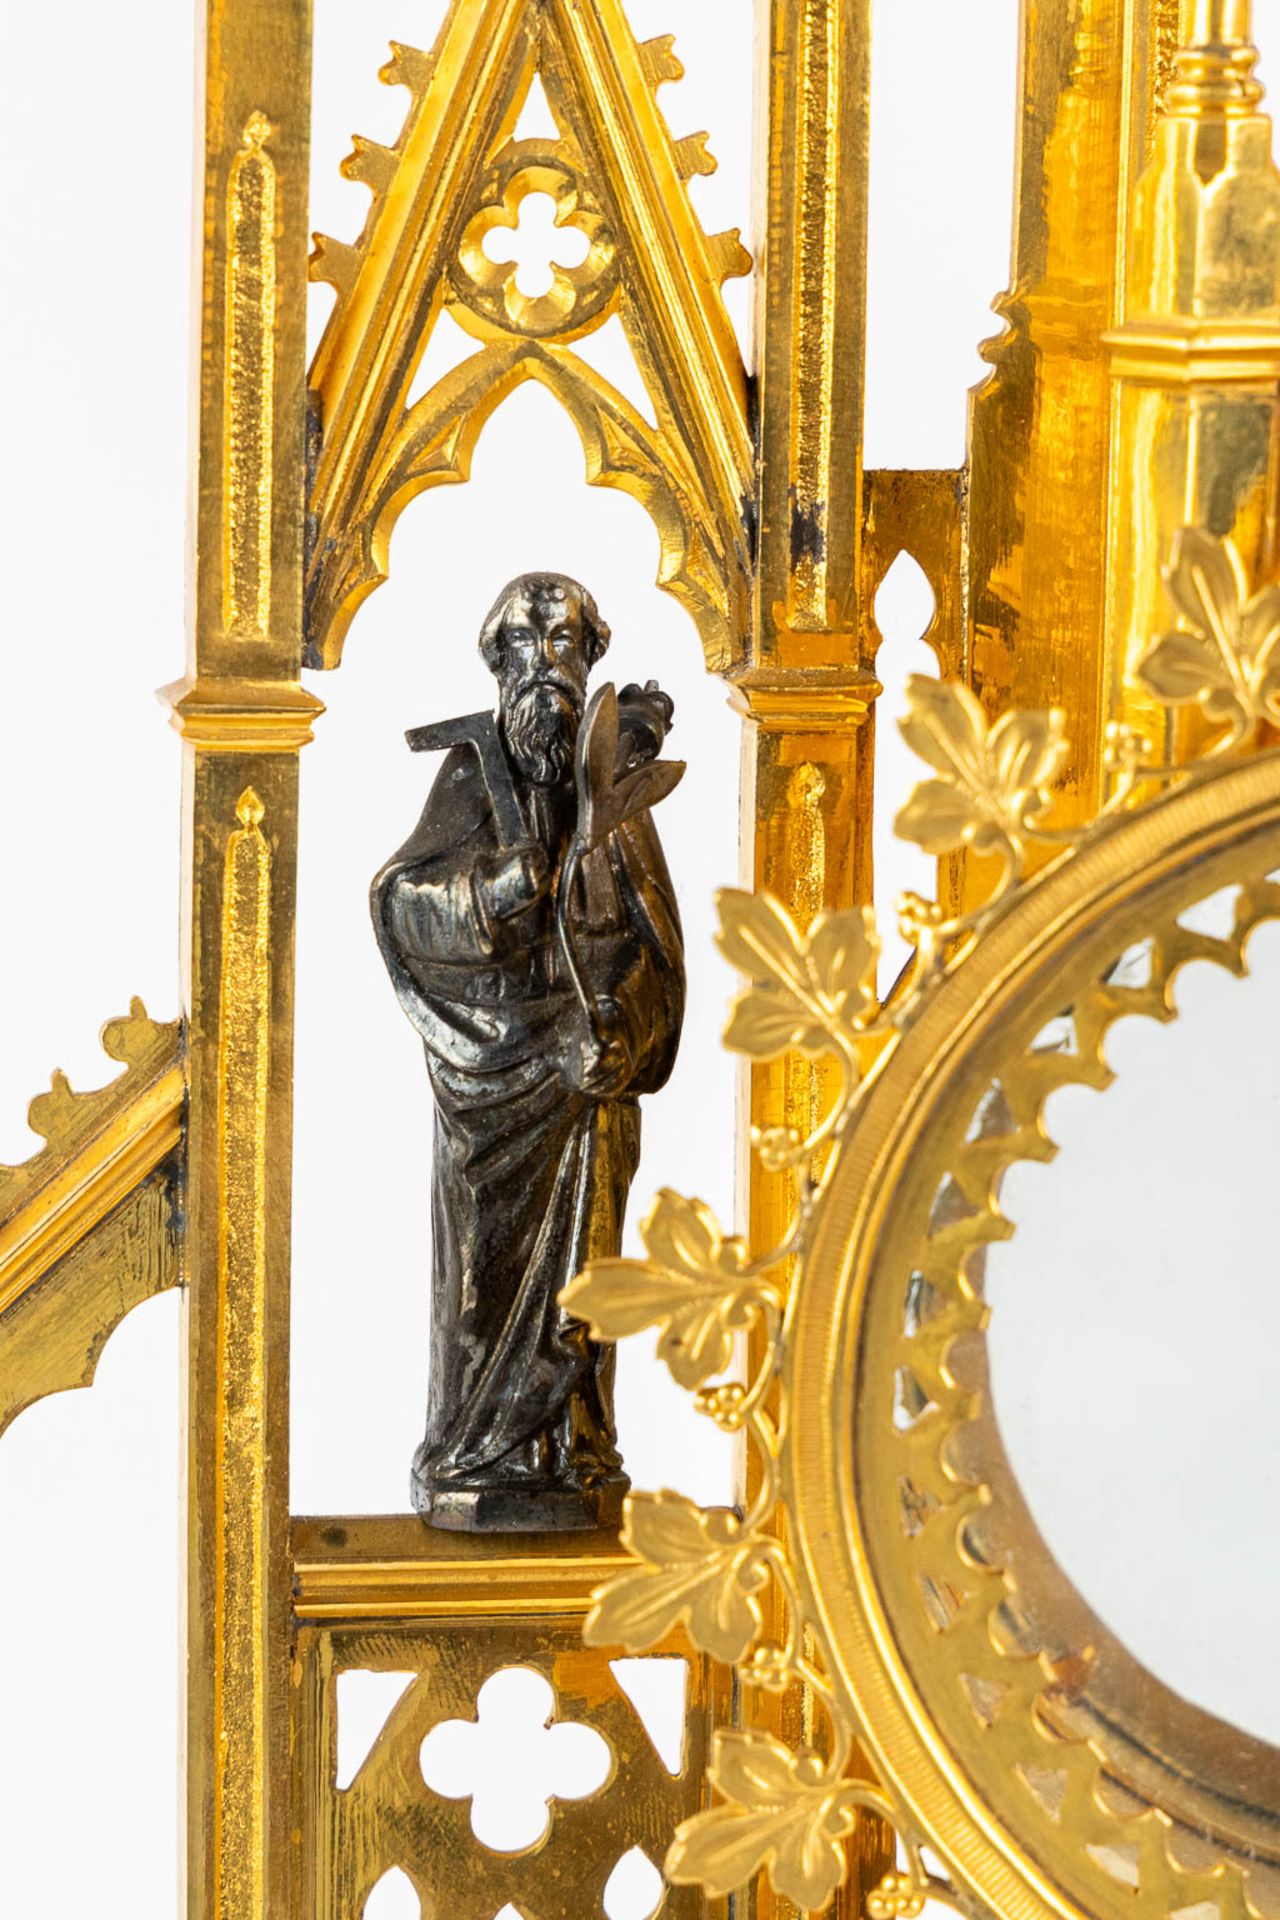 A Tower monstrance, gilt and silver plated brass, Gothic Revival. 19th C. (W:21,5 x H:58 cm) - Image 3 of 22